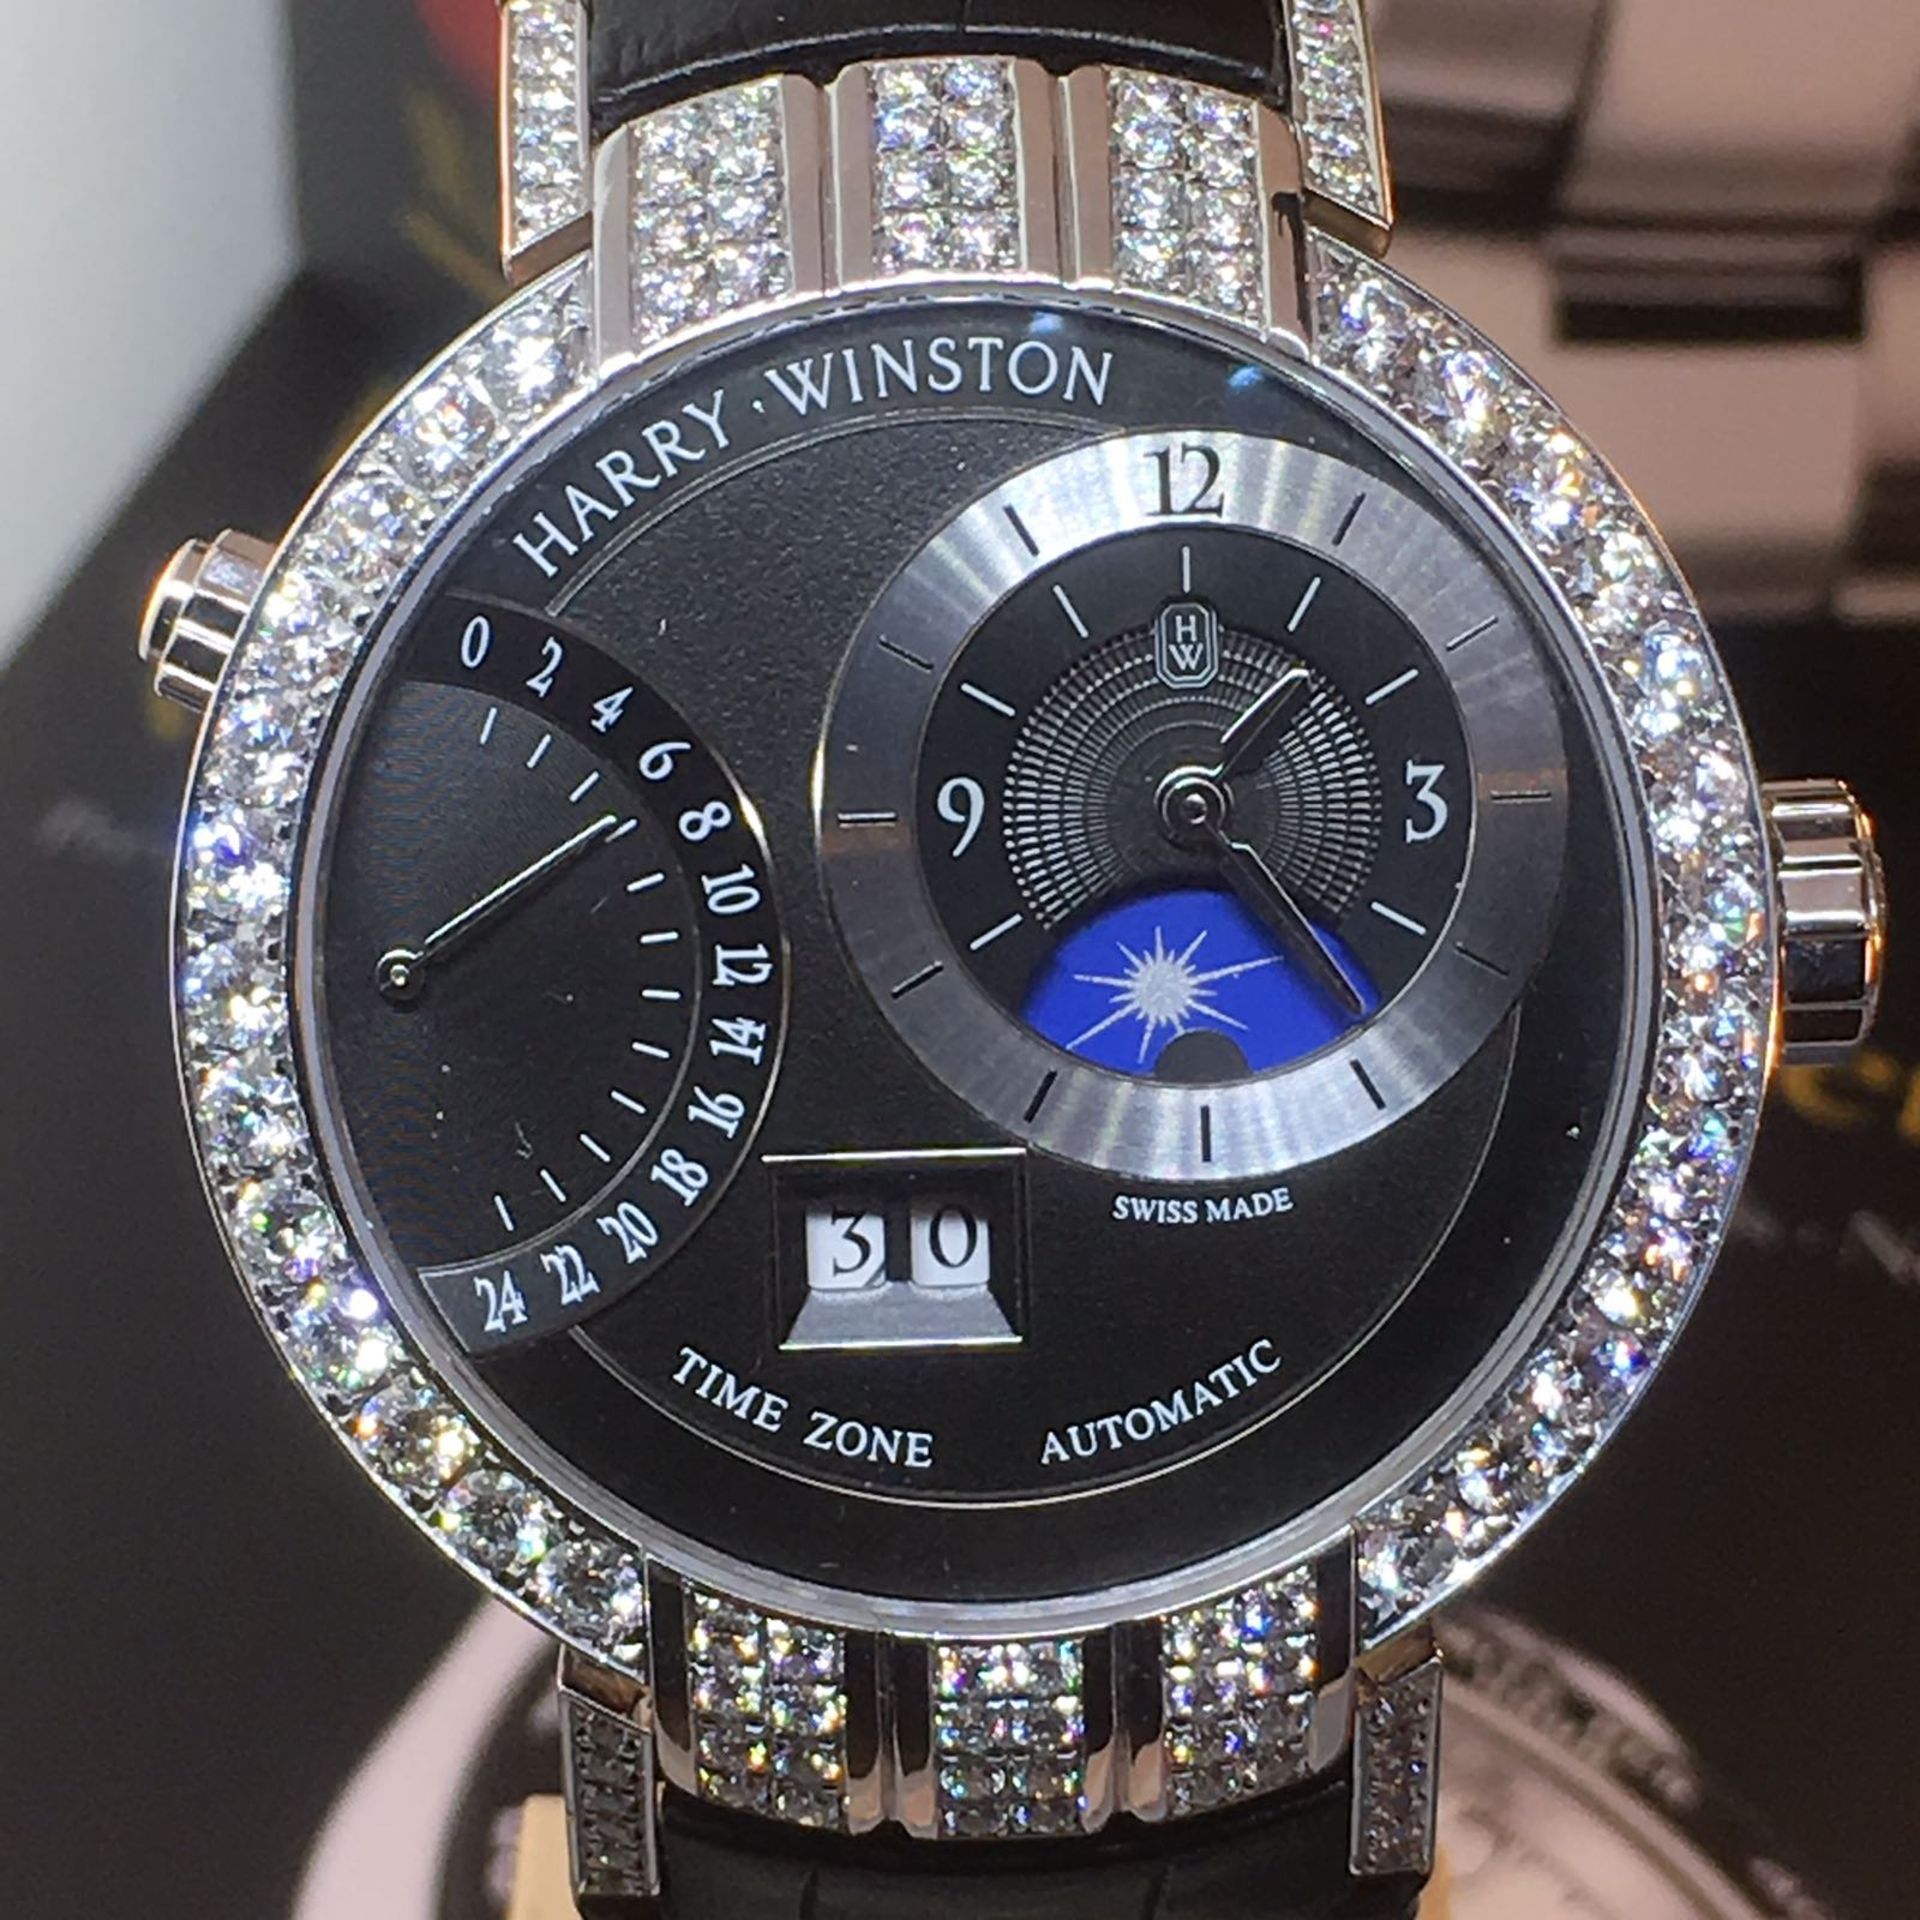 HARRY WINSTON Premier Excenter 18k White Gold Watch with box & papers